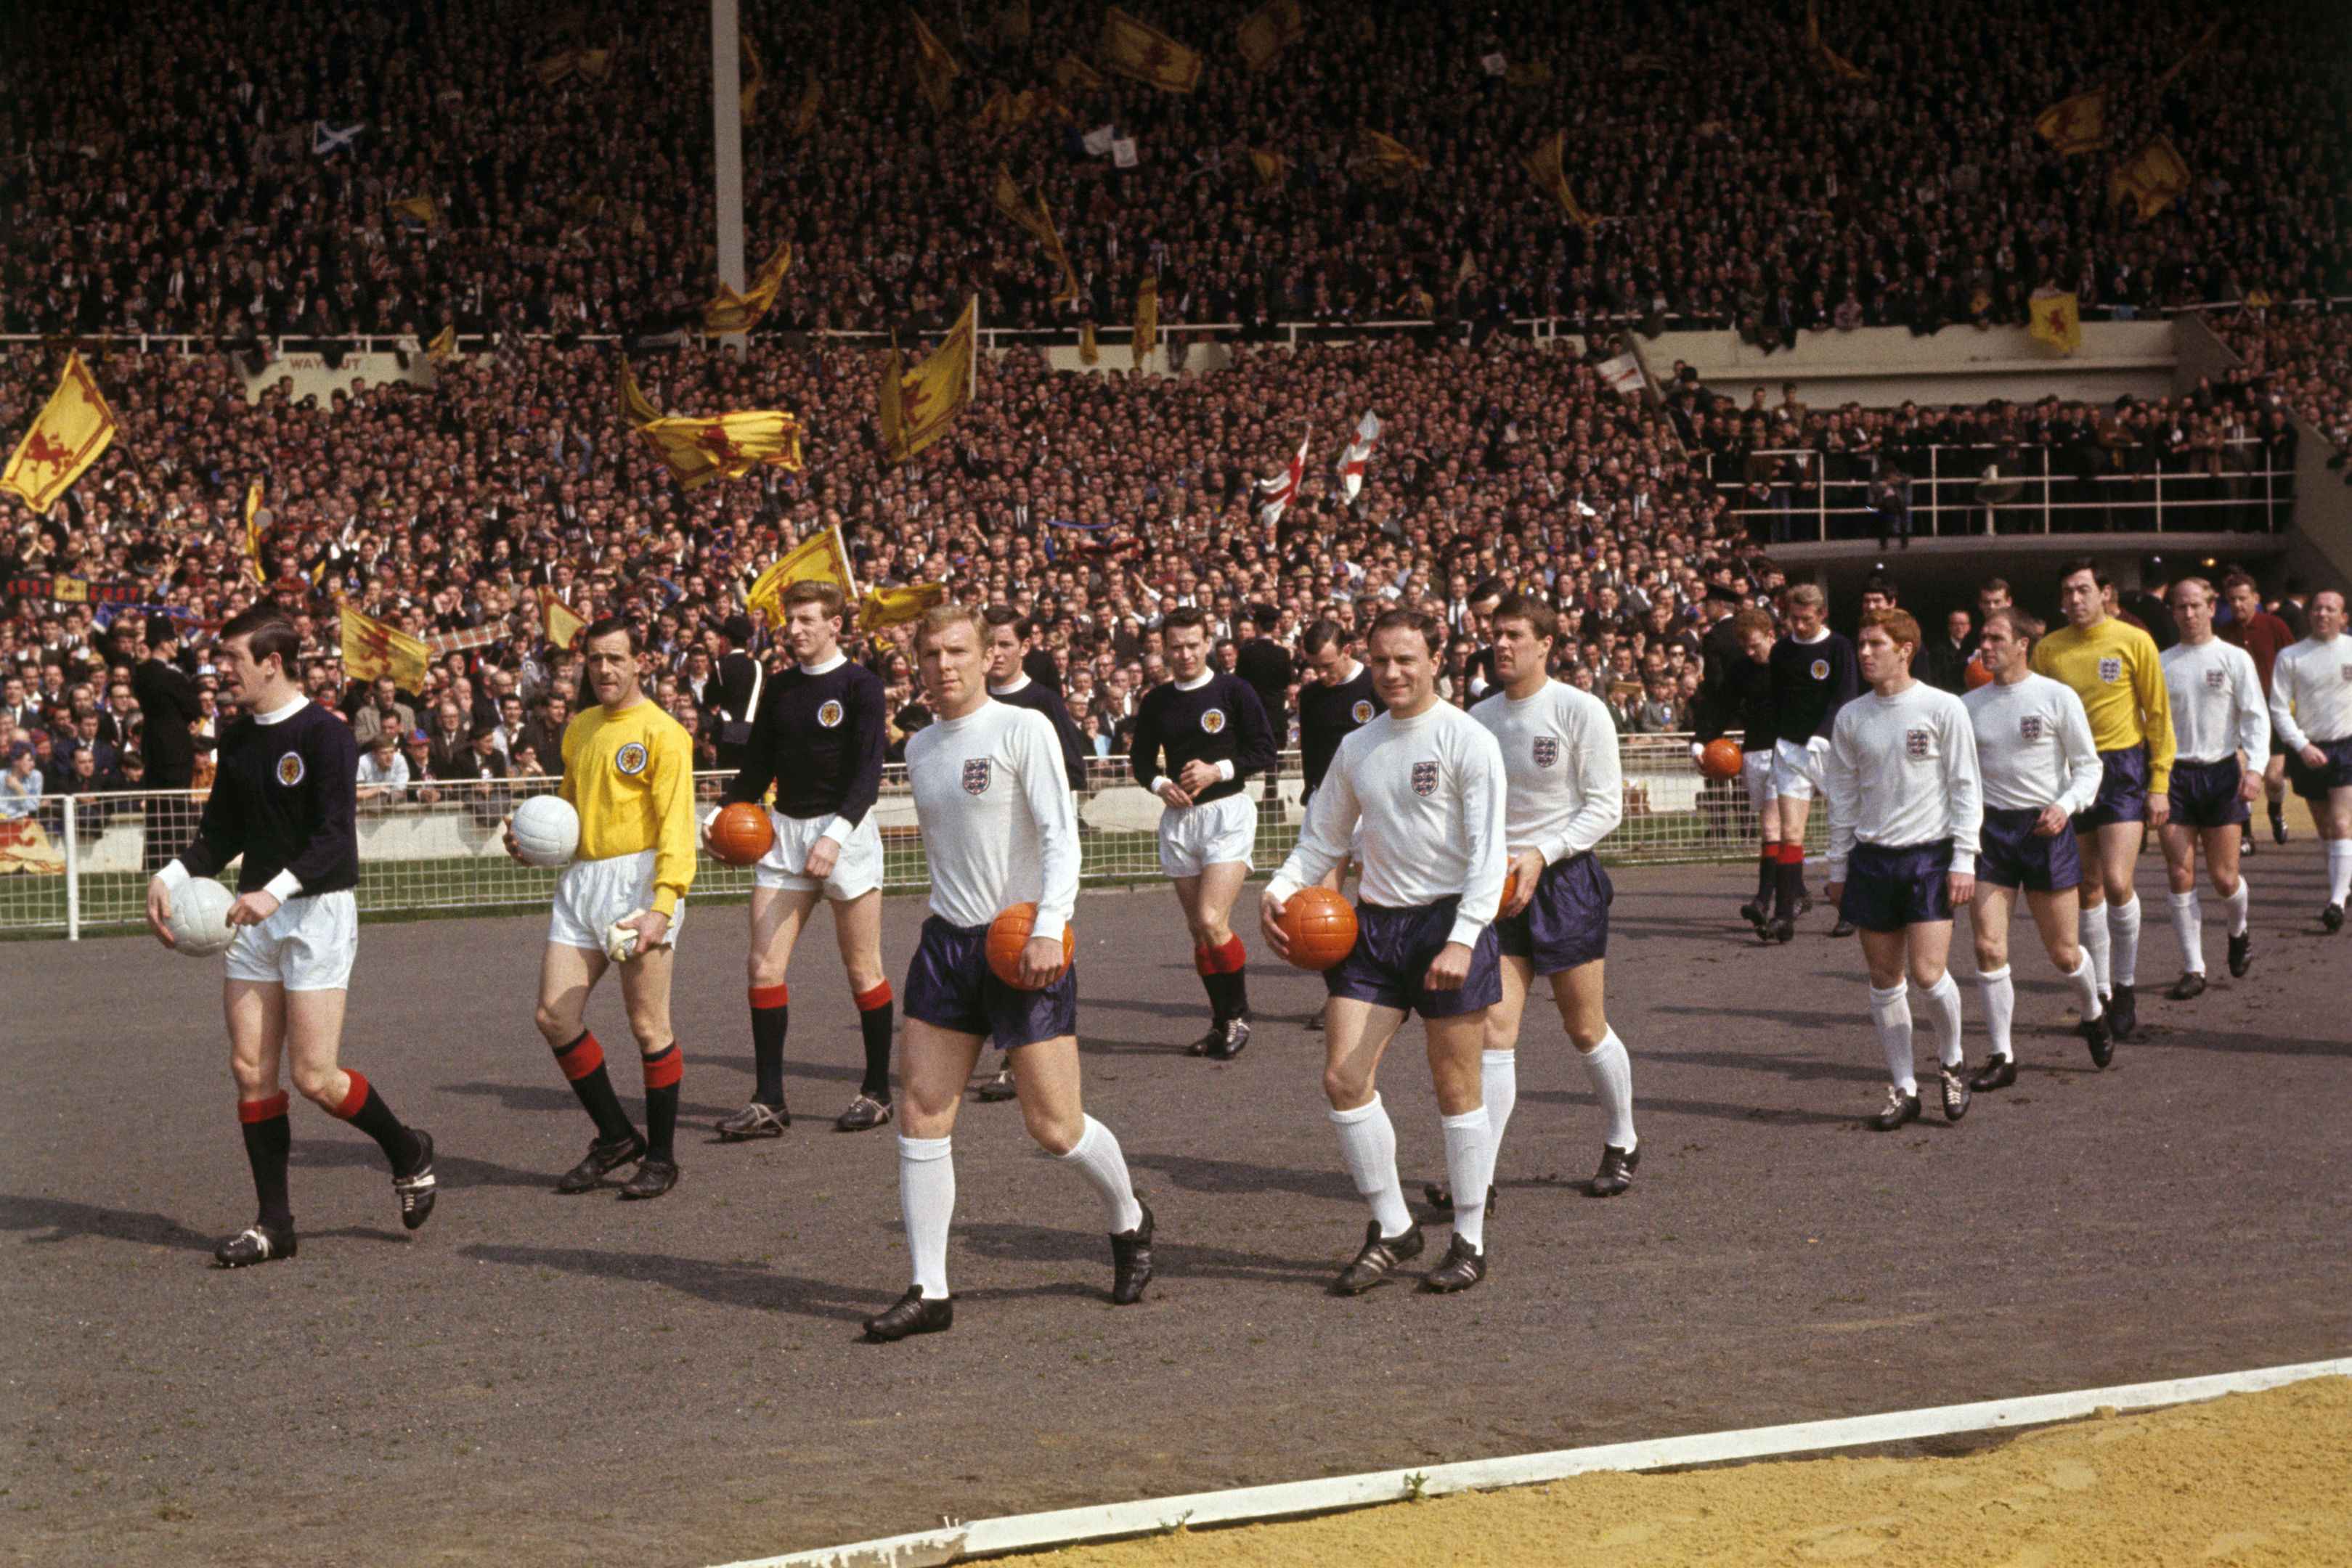 Scotland captain John Greig and England captain Bobby Moore lead out their teams ahead of the kick off (PA Wire/Press Association Images)